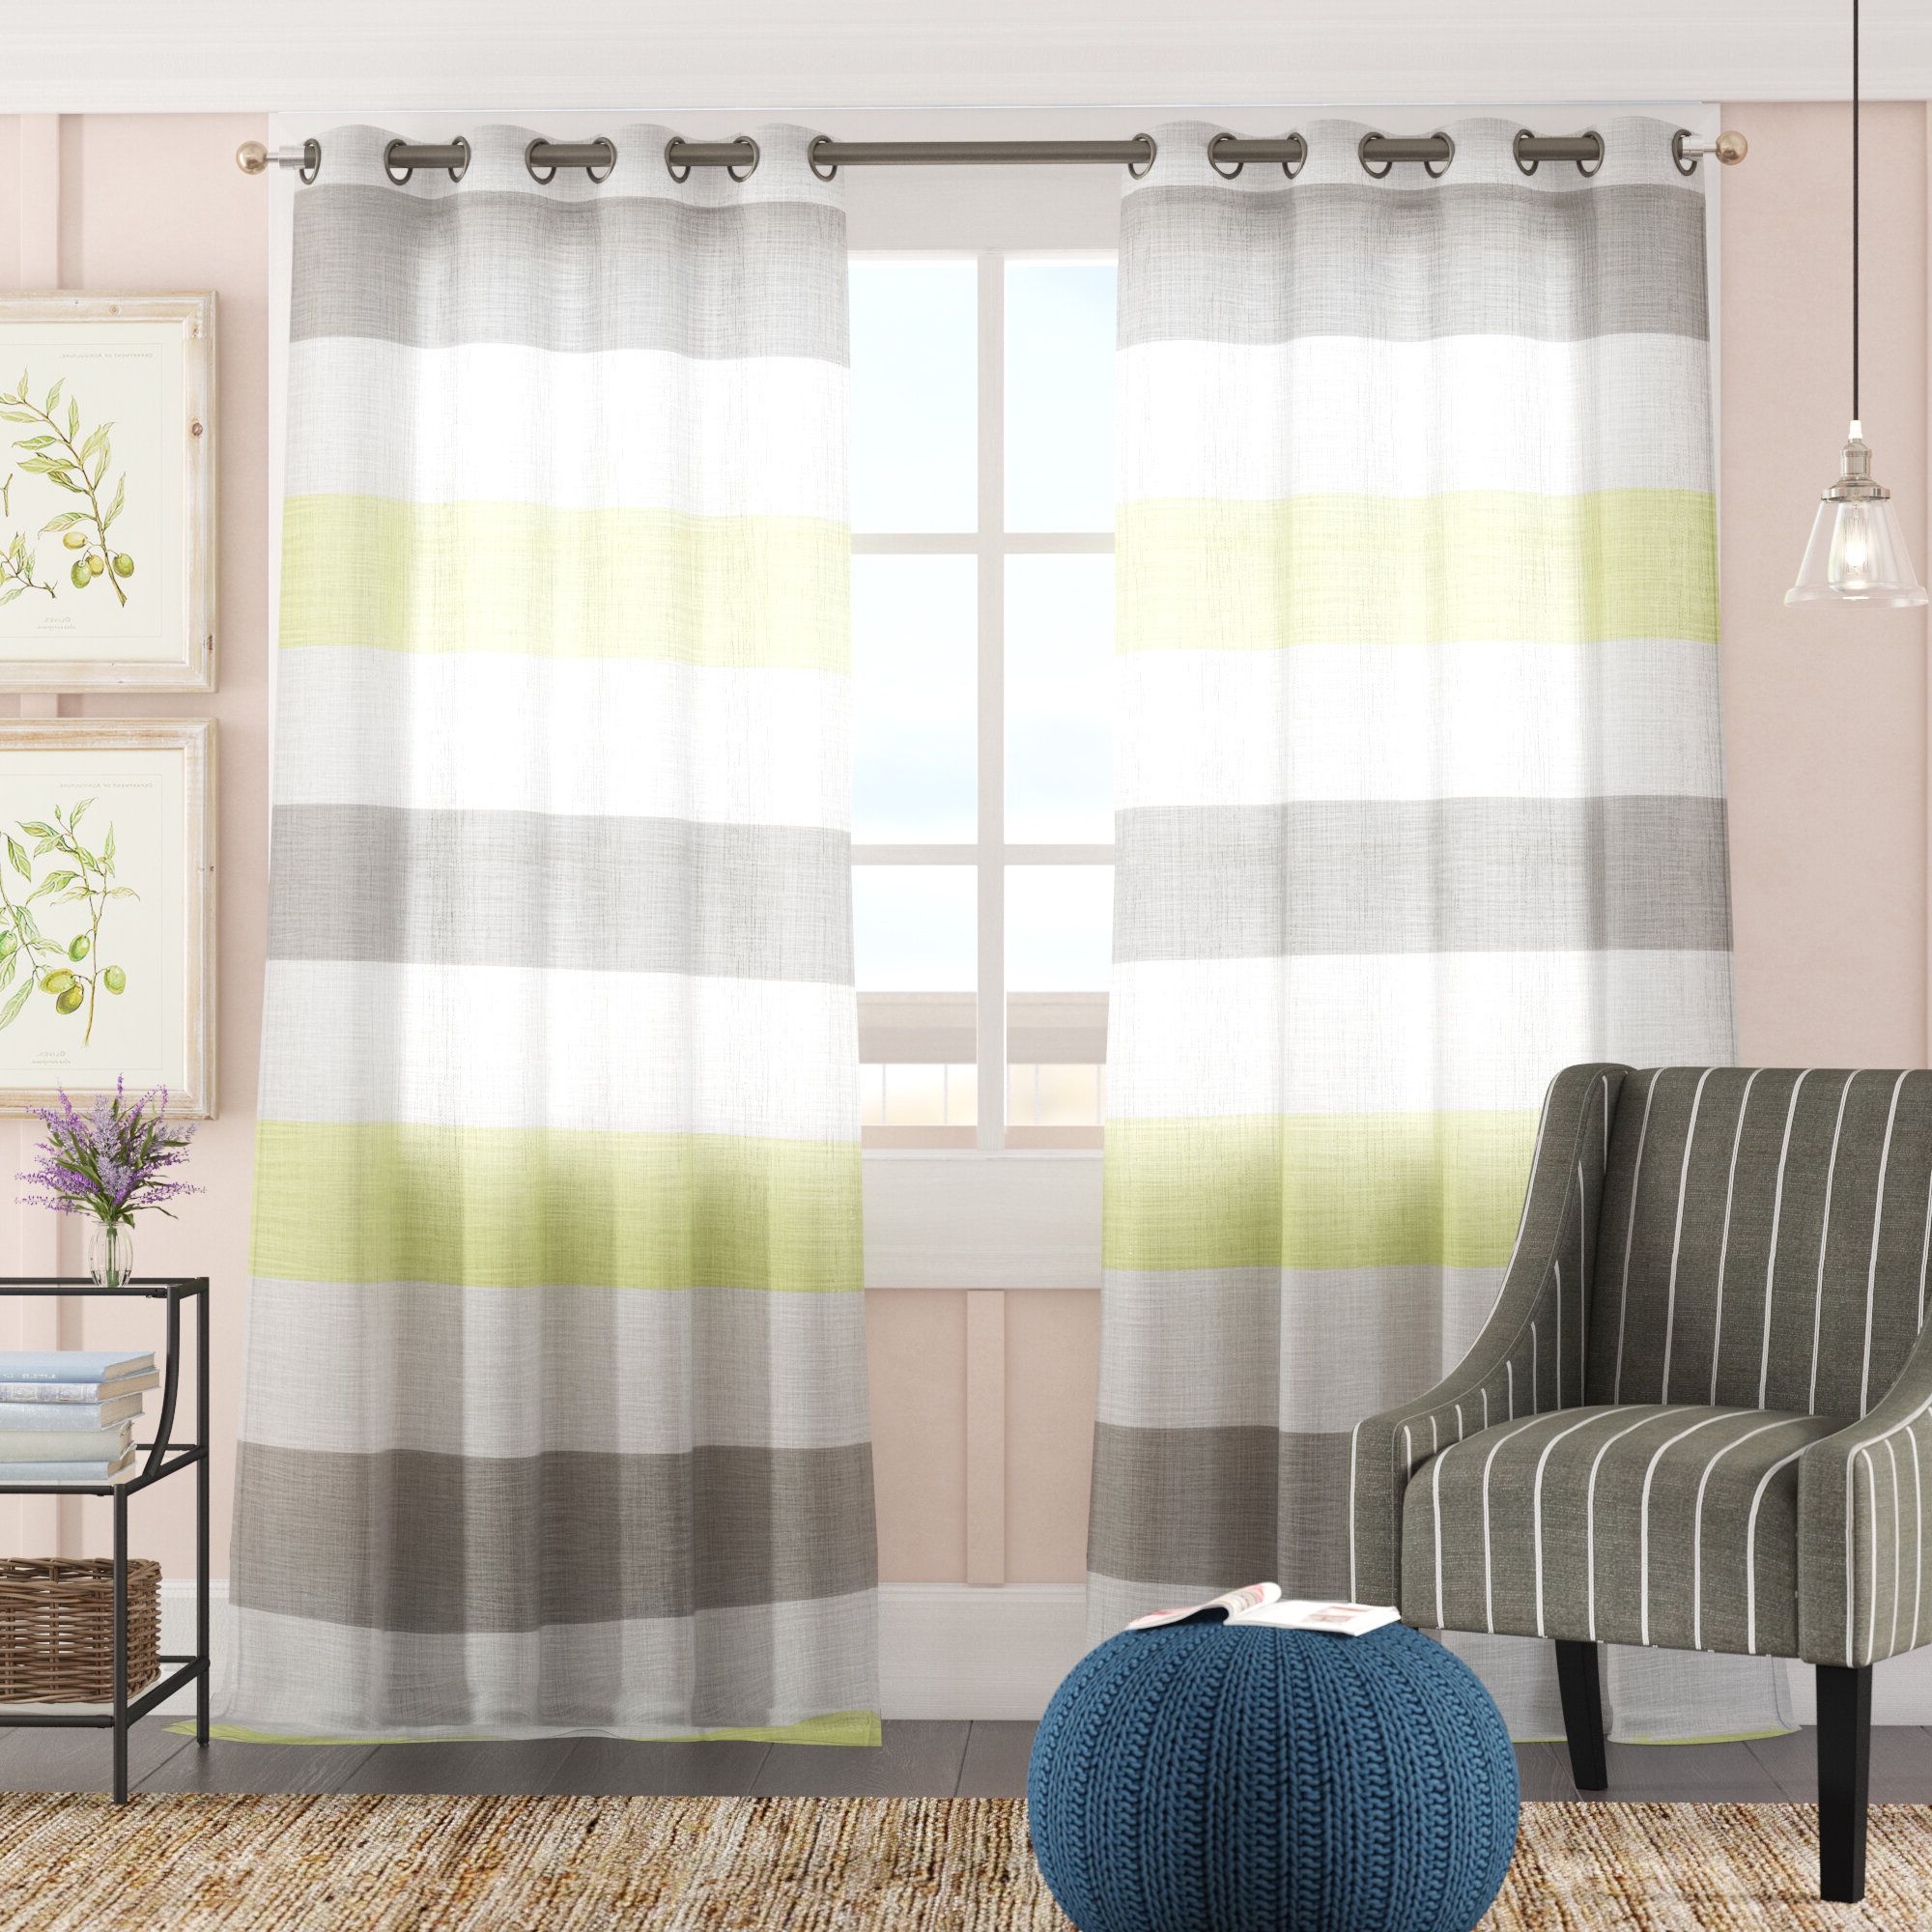 Hiltonia Striped Semi Sheer Grommet Curtain Pertaining To 2020 Ombre Stripe Yarn Dyed Cotton Window Curtain Panel Pairs (View 15 of 20)